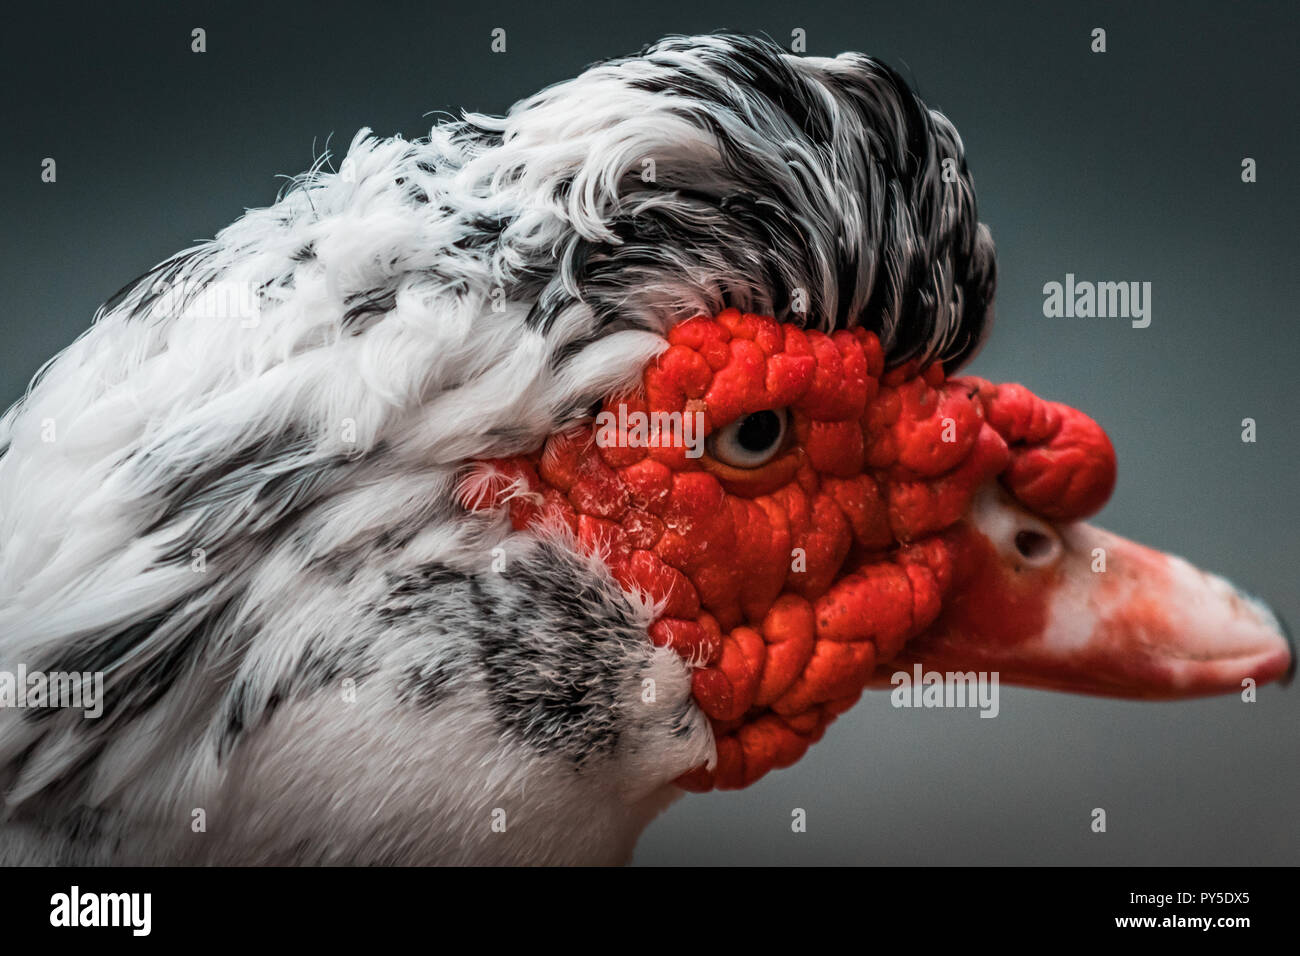 Beautiful Red Headed Muscovy duck (Cairina moschata), large angry bird native to Mexico, Central, and South America. Eye close up, vibrant colors. Stock Photo